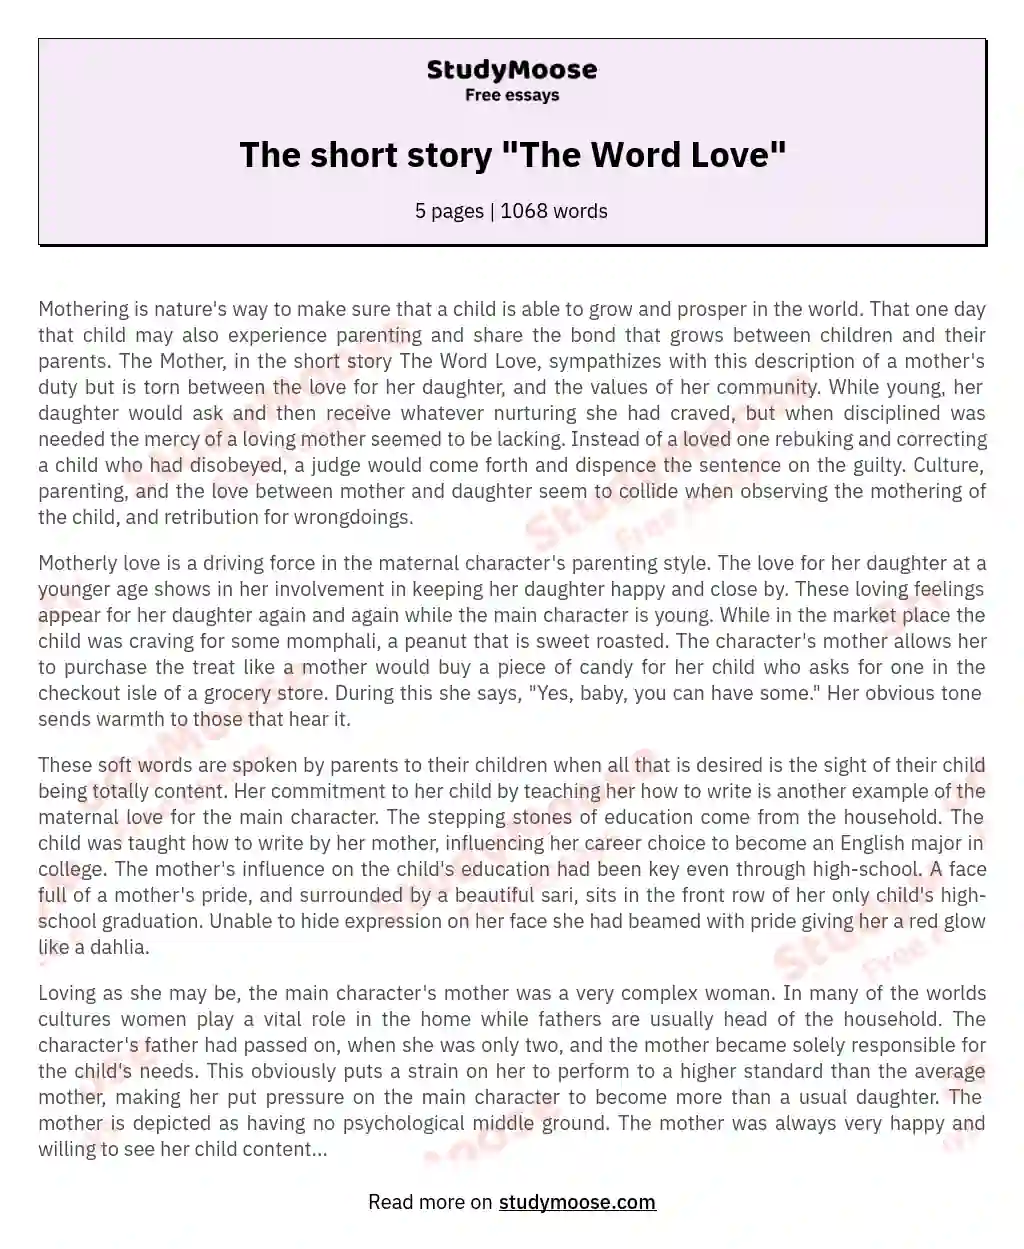 The short story "The Word Love" essay